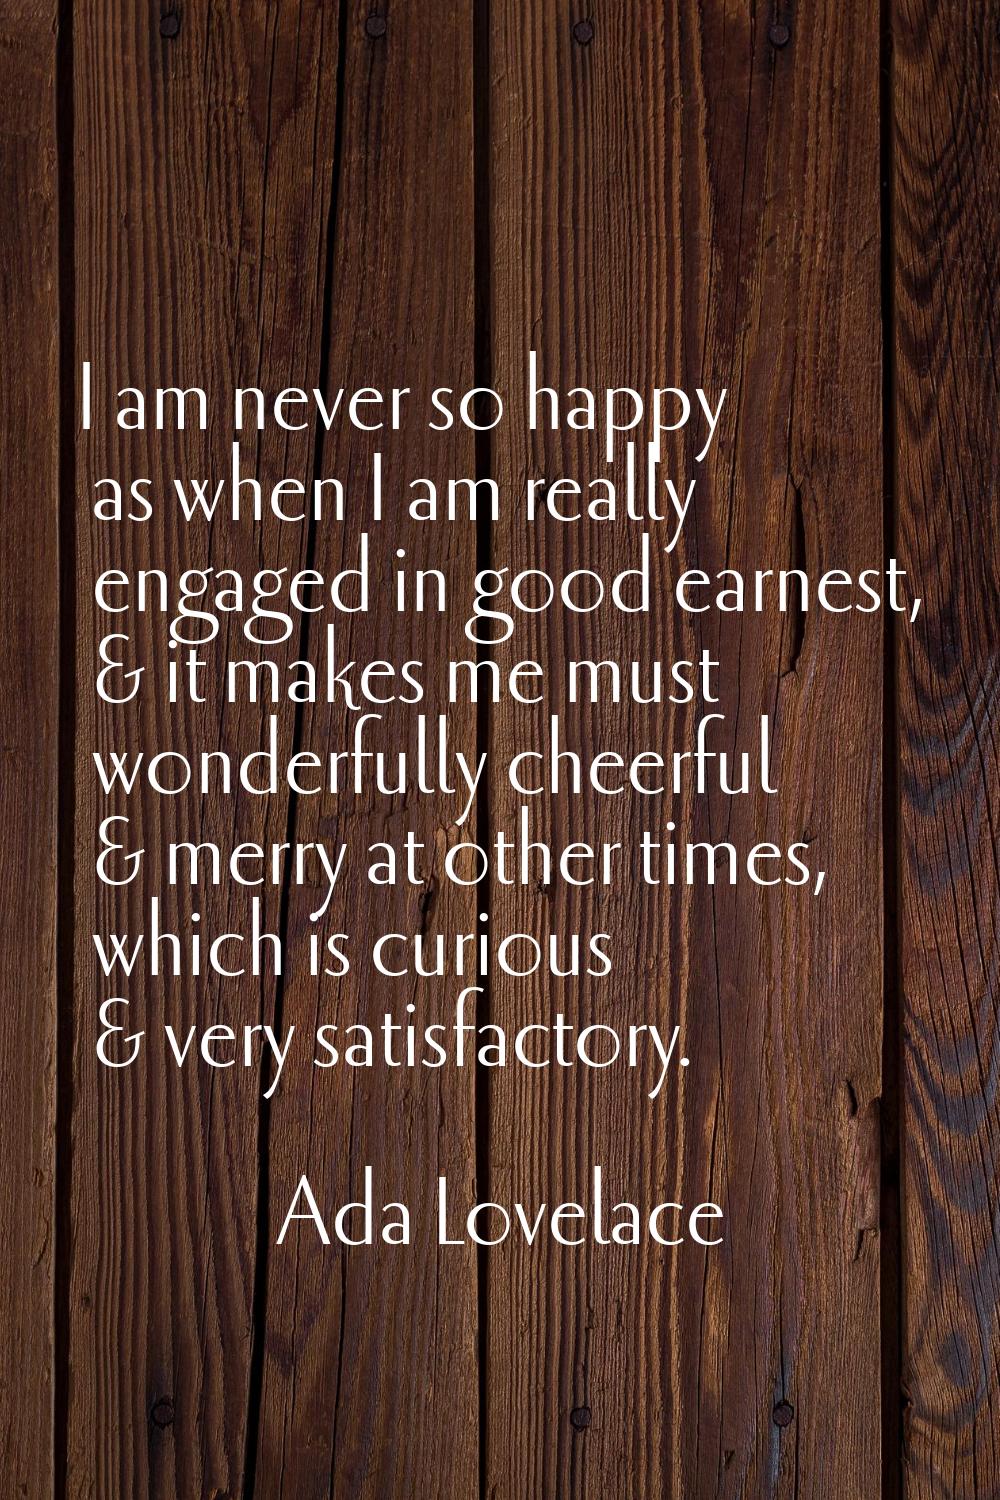 I am never so happy as when I am really engaged in good earnest, & it makes me must wonderfully che